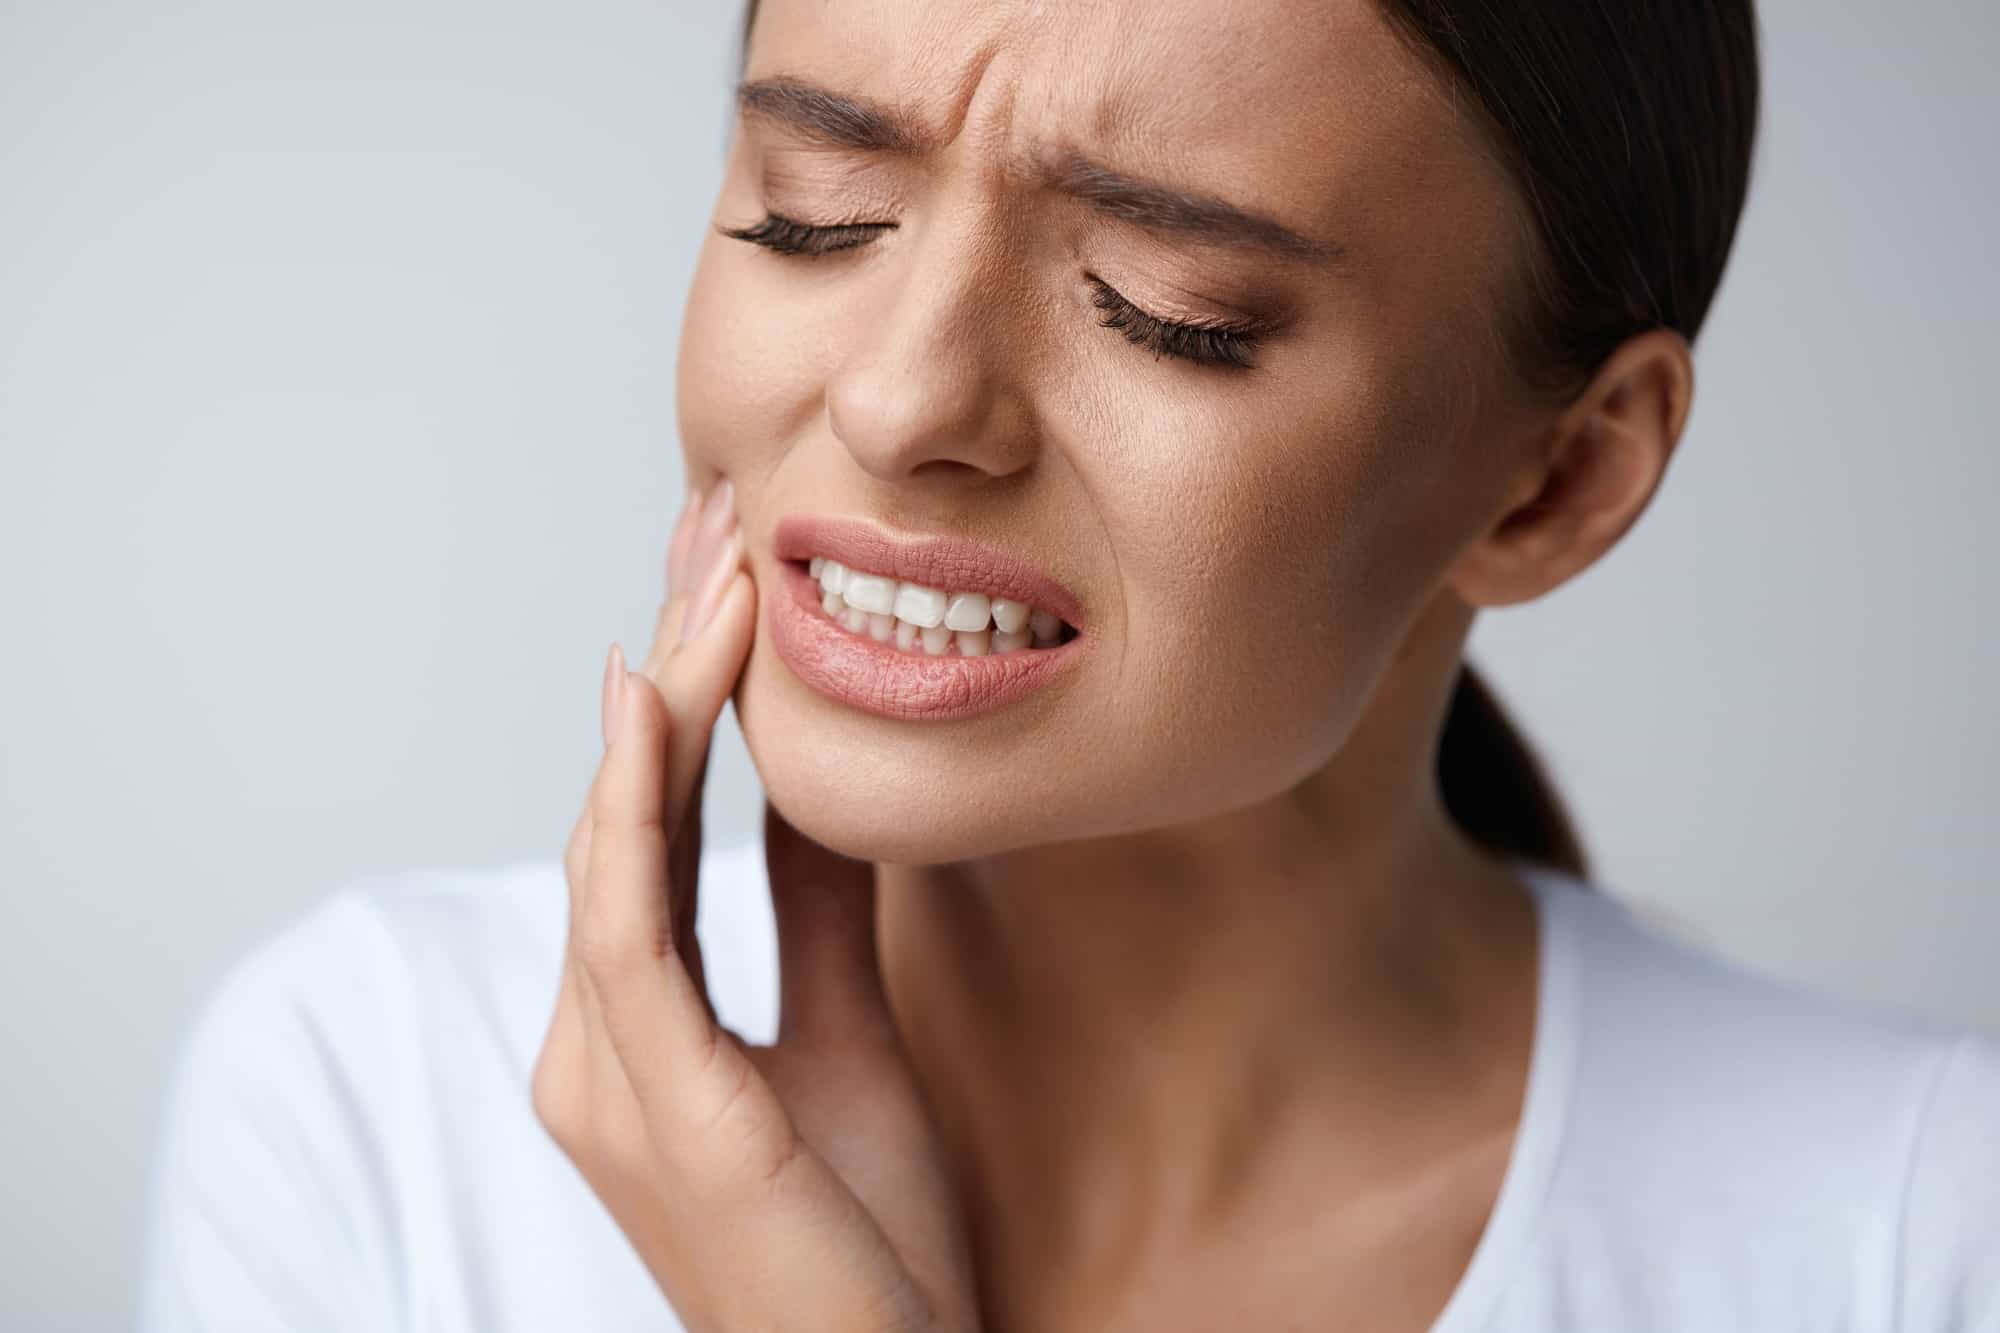 Dental pain? What should you do